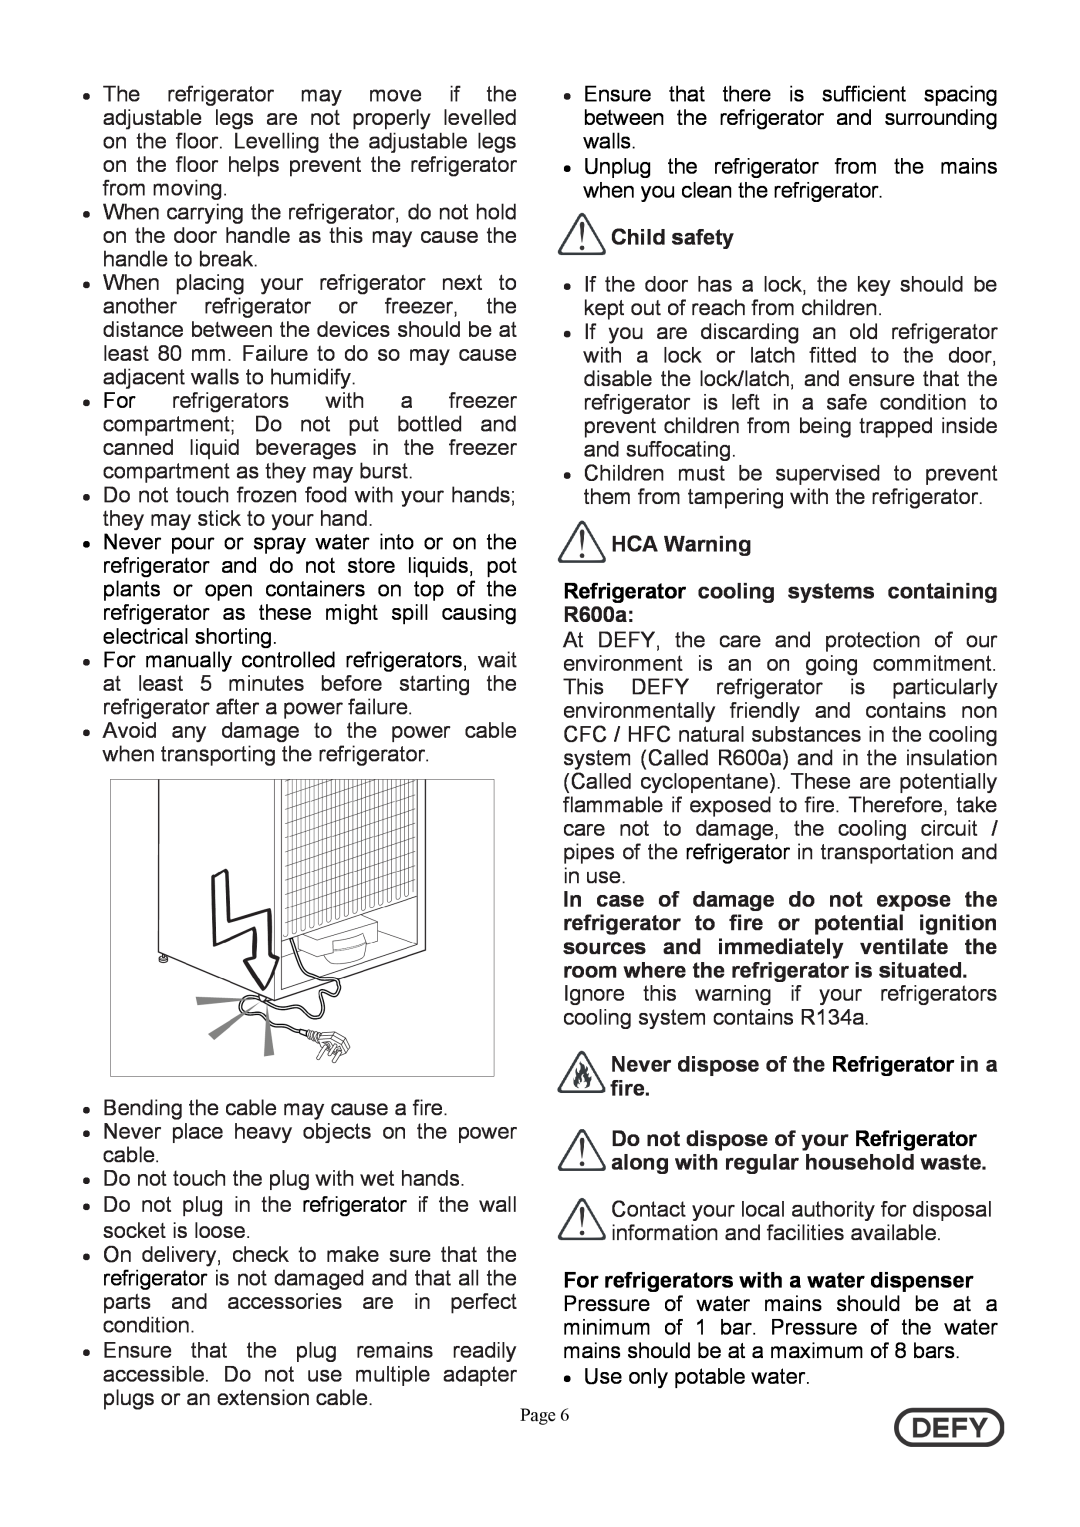 Defy Appliances DFF399 instruction manual Child safety, HCA Warning, Refrigerator cooling systems containing R600a 